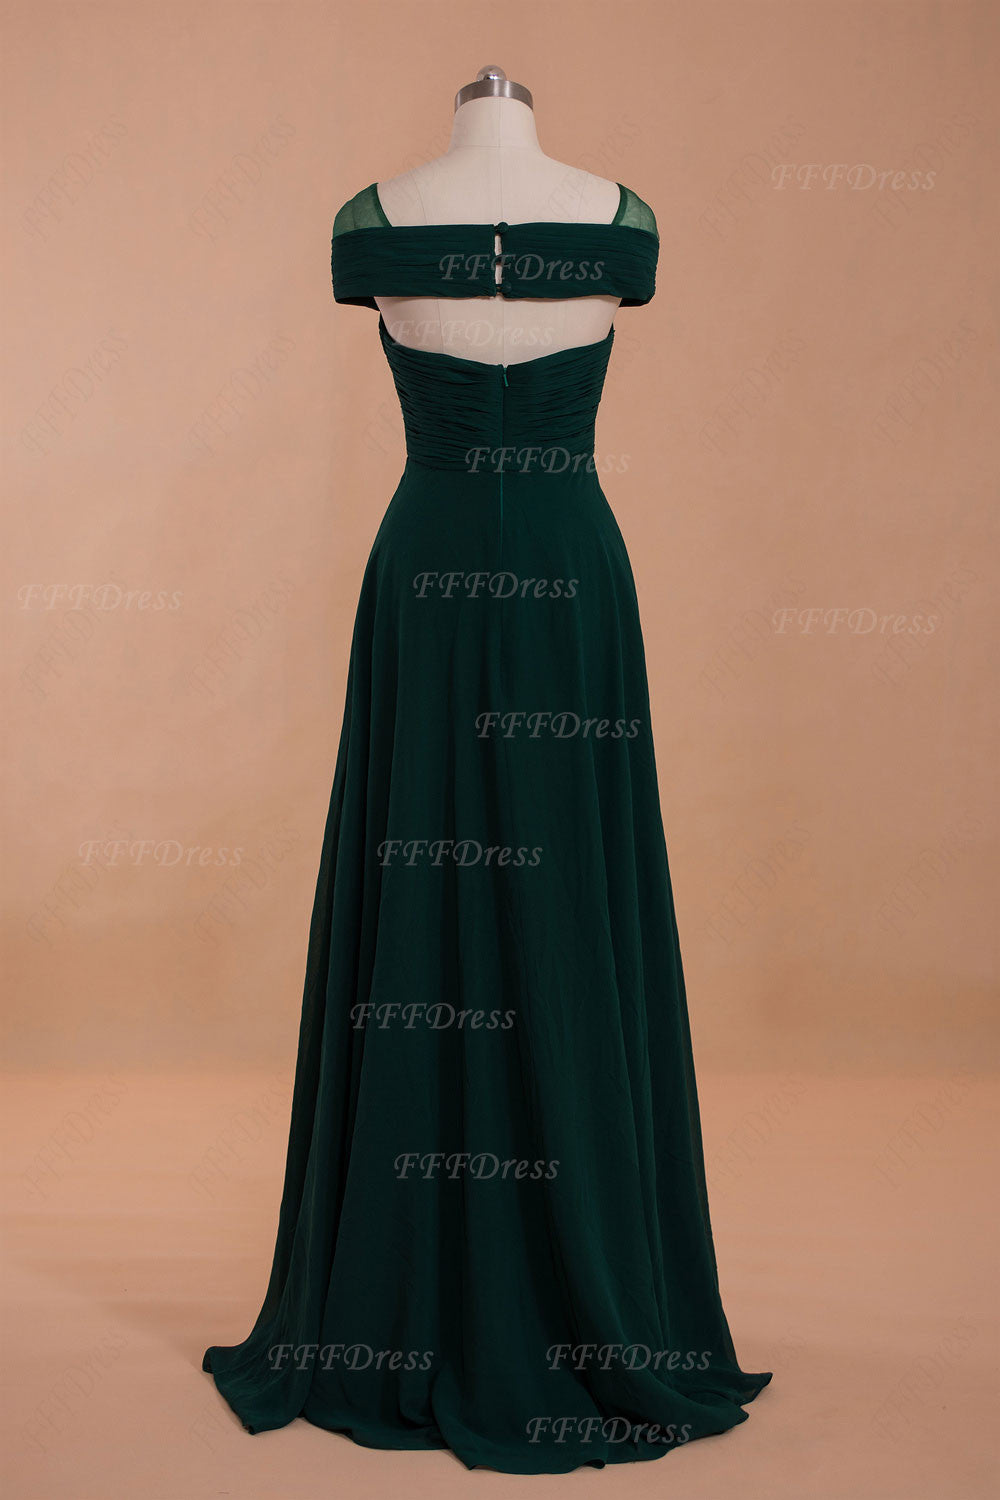 Maid of honor dress Forest green bridesmaid dresses